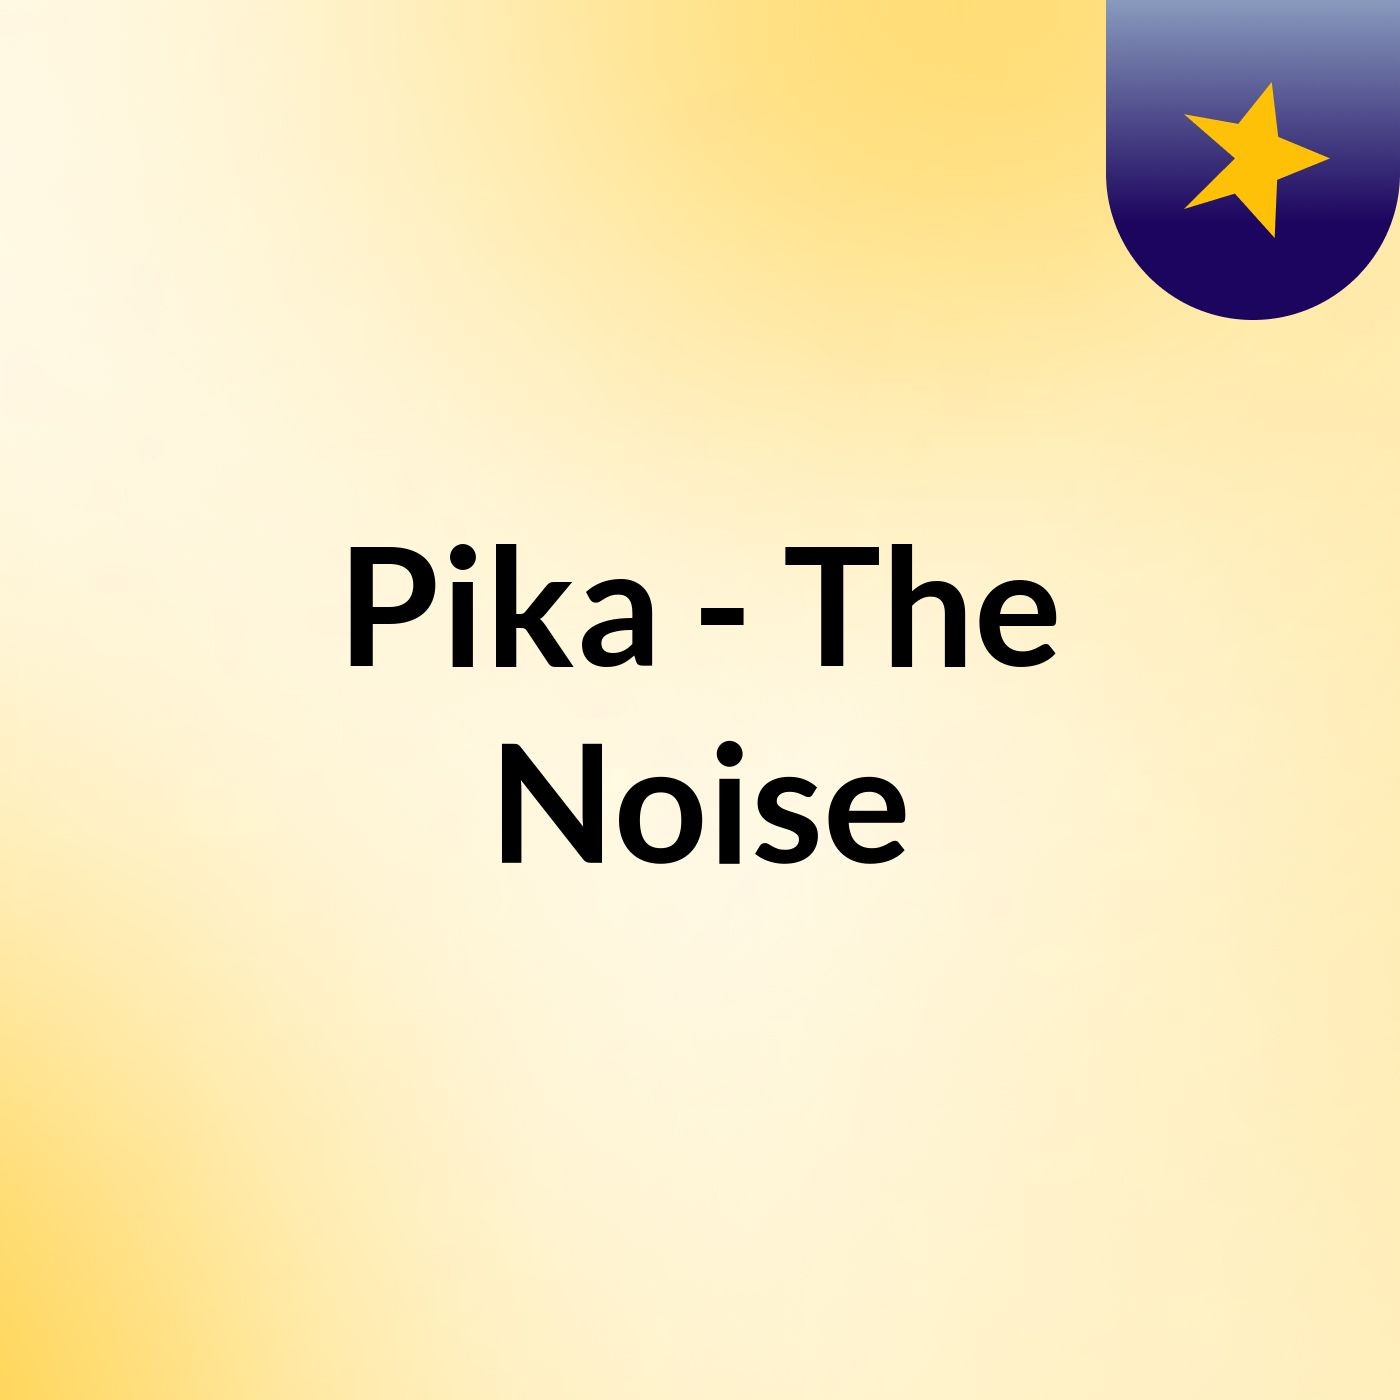 Pika - The Noise